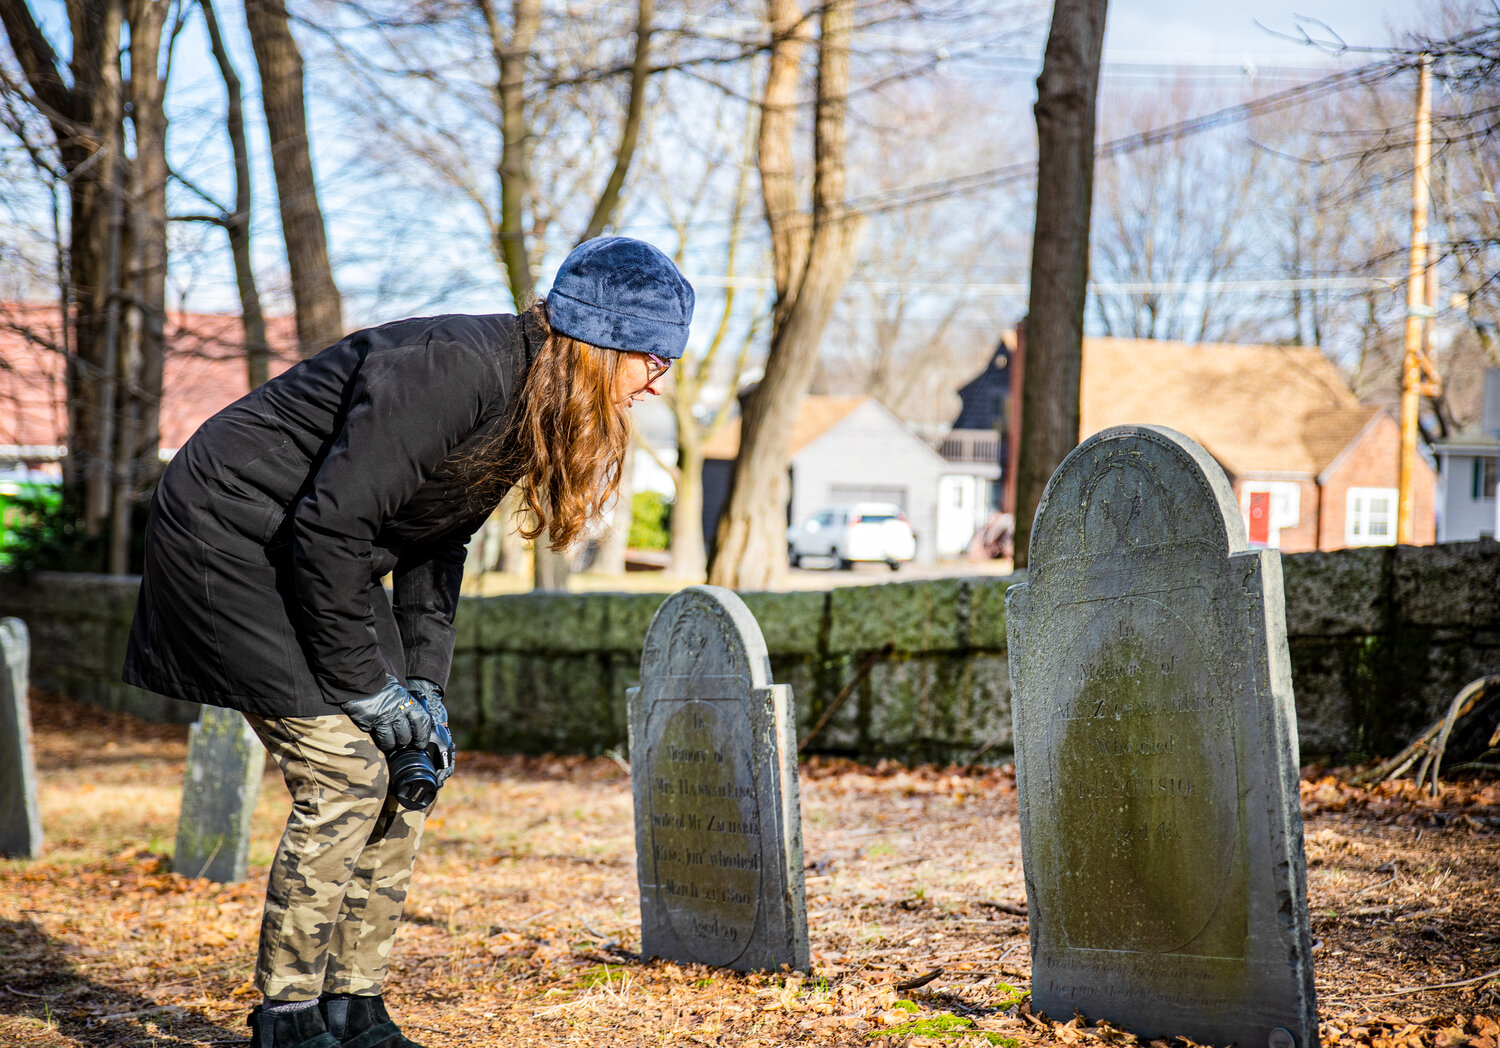 Christy King faces the tombstone of Zachariah King Jr., whose portrait is still in her family, in the historic King Cemetery named for her family, located in Peabody formerly part of Salem and Beverly.